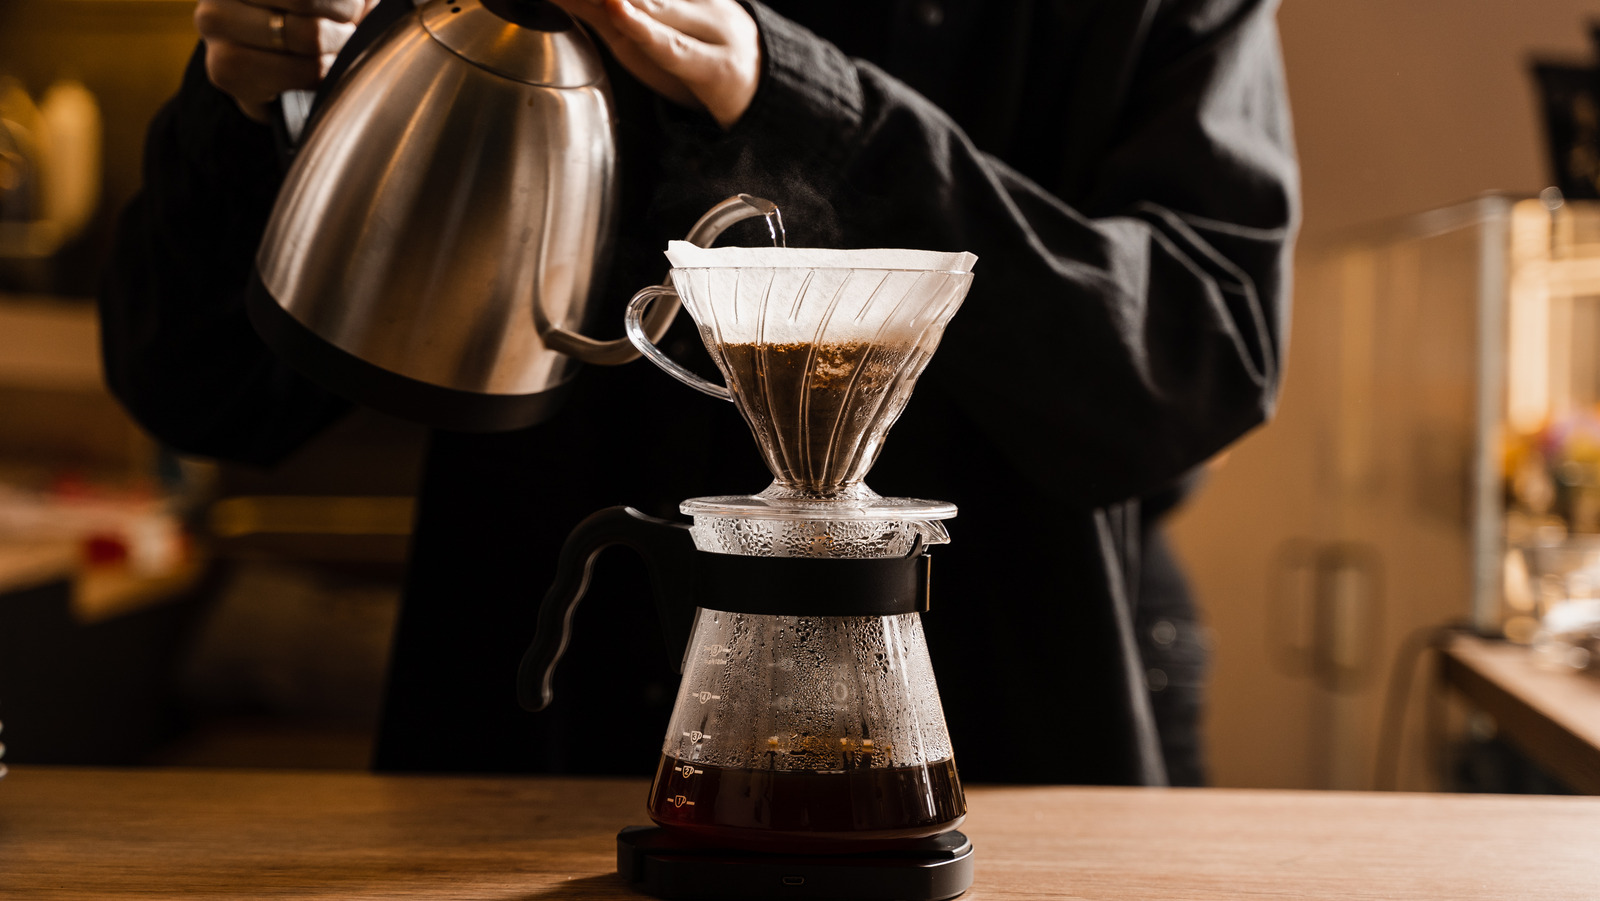 https://www.tastingtable.com/img/gallery/the-best-type-of-dripper-to-use-when-brewing-pour-over-coffee/l-intro-1698128760.jpg